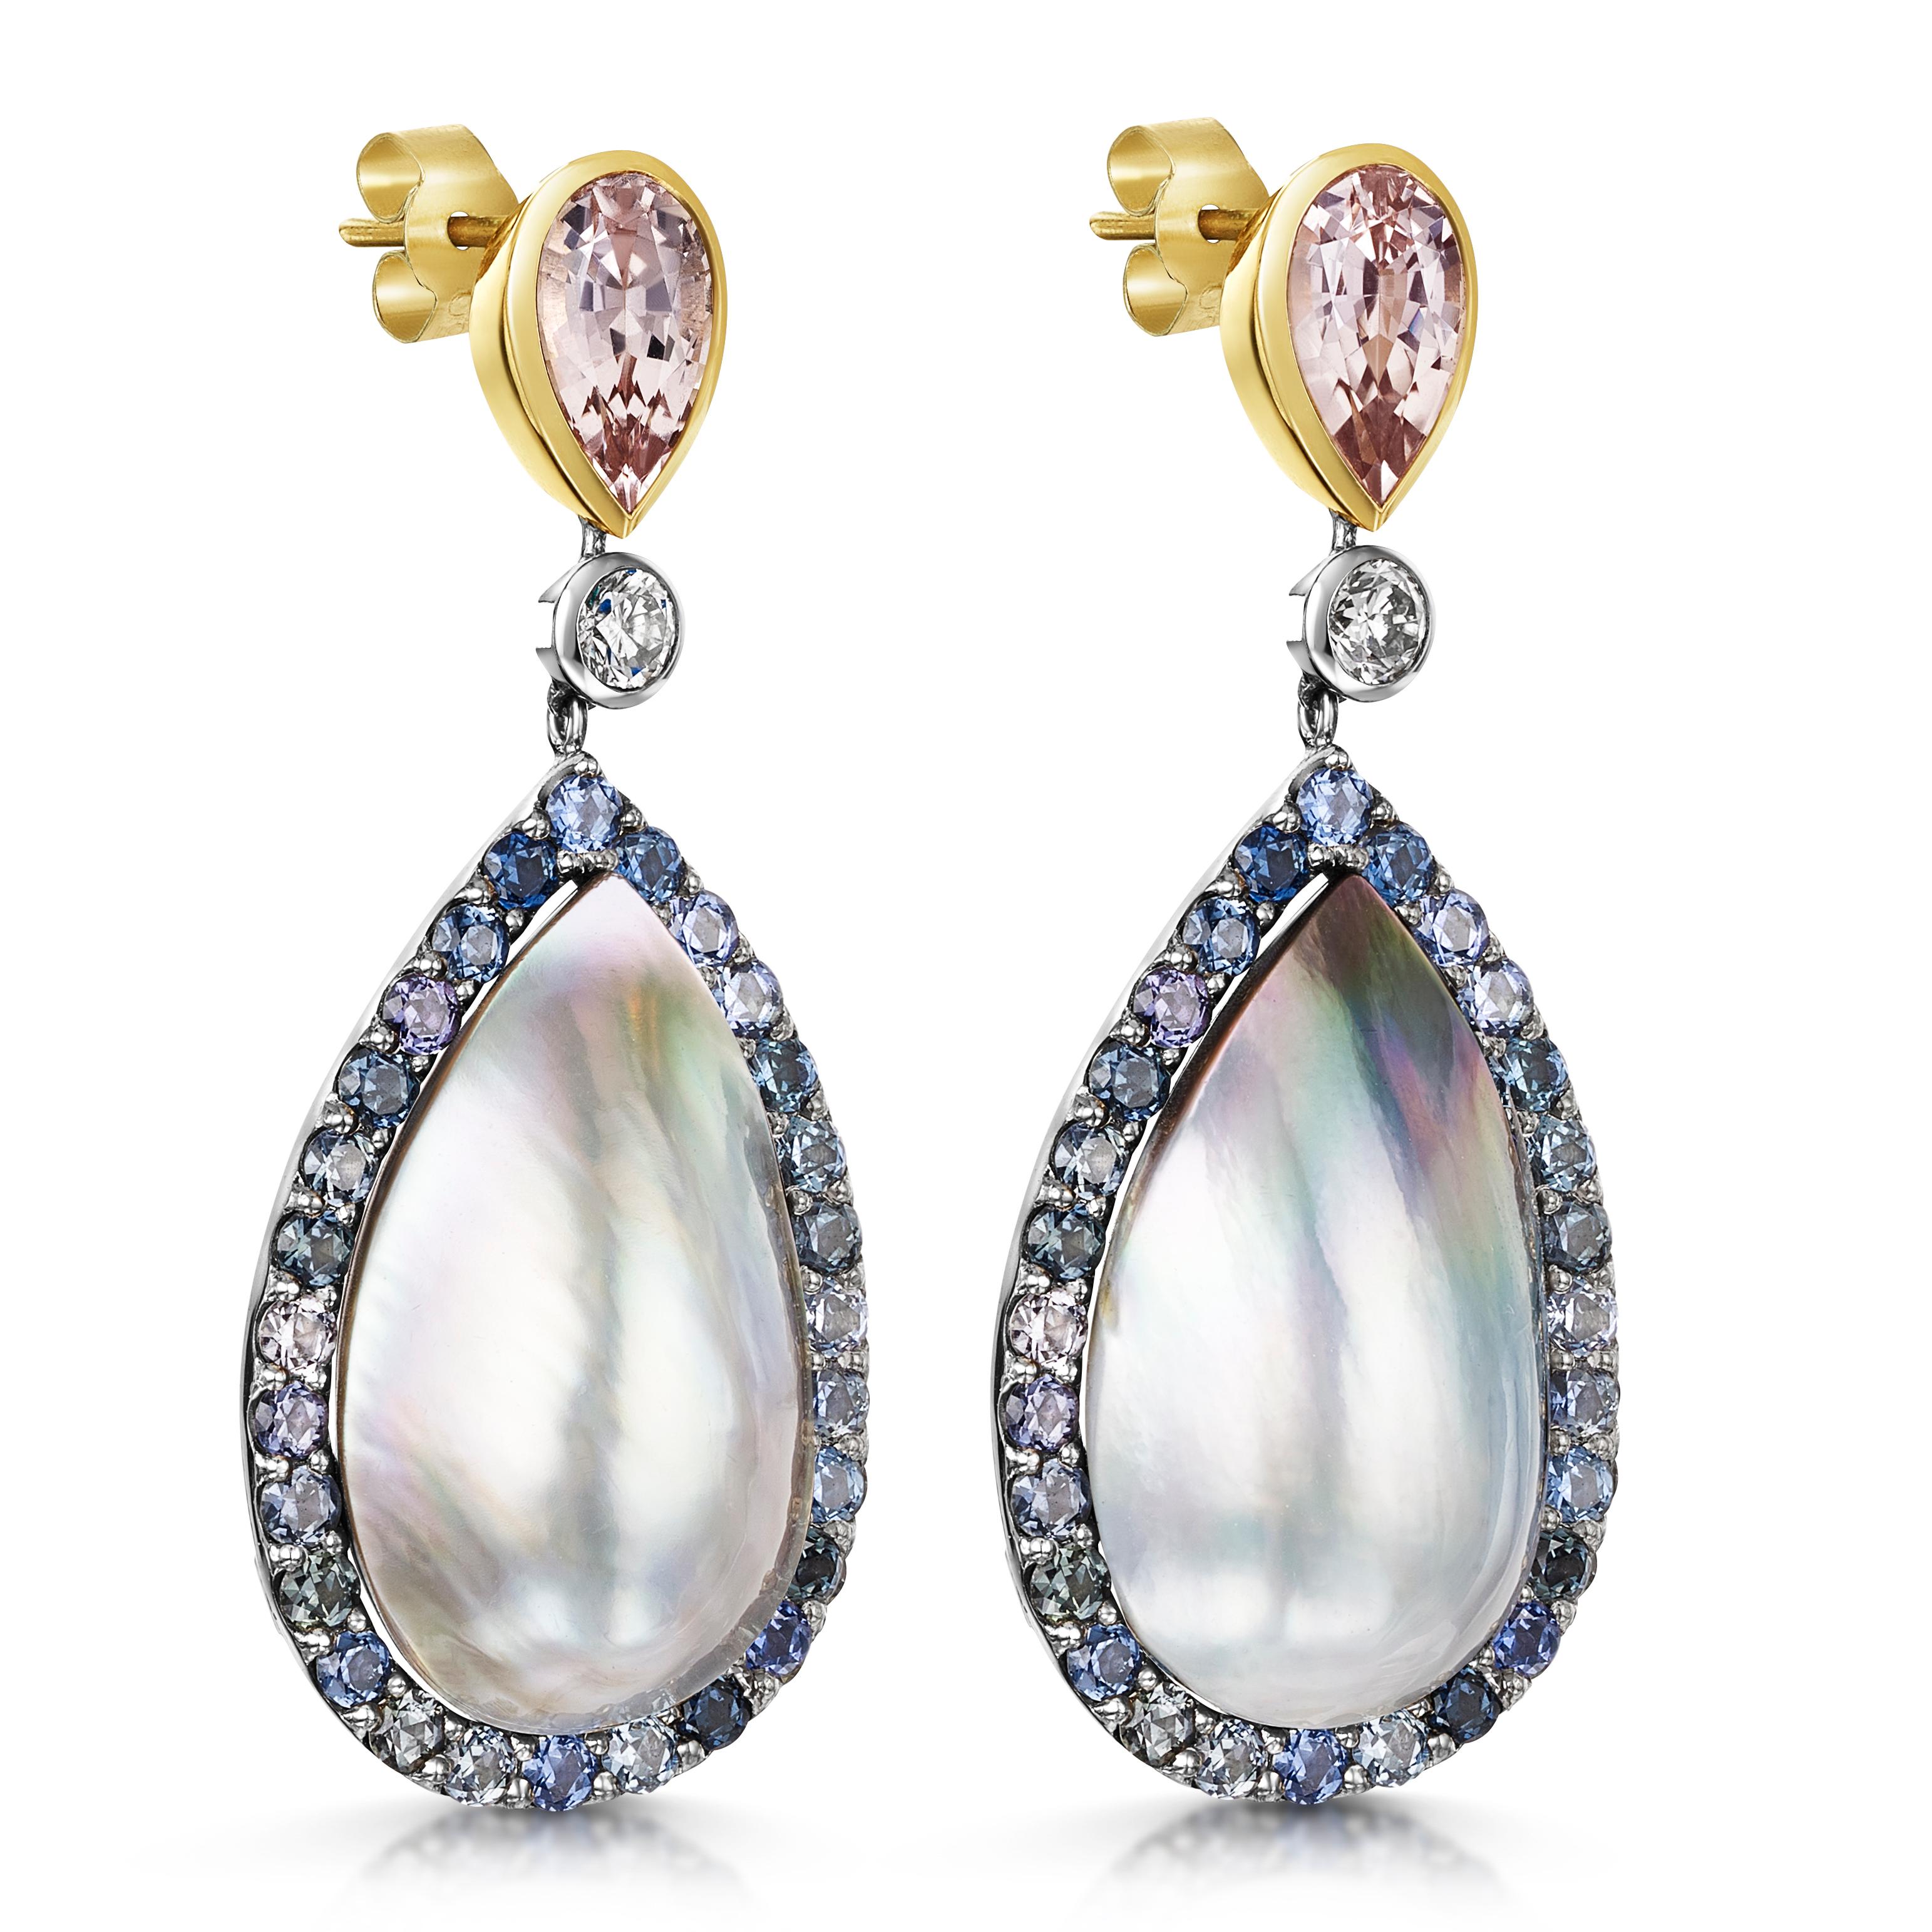 Created by Aventina-Spencer, these one-of-a-kind earrings feature 3.25 carats of Morganite, 0.37 carats of round brilliant cut G/VS diamonds, 3.03 carats of natural, traceable and unheated Madagascan Color Change Sapphires and luminous Conscious